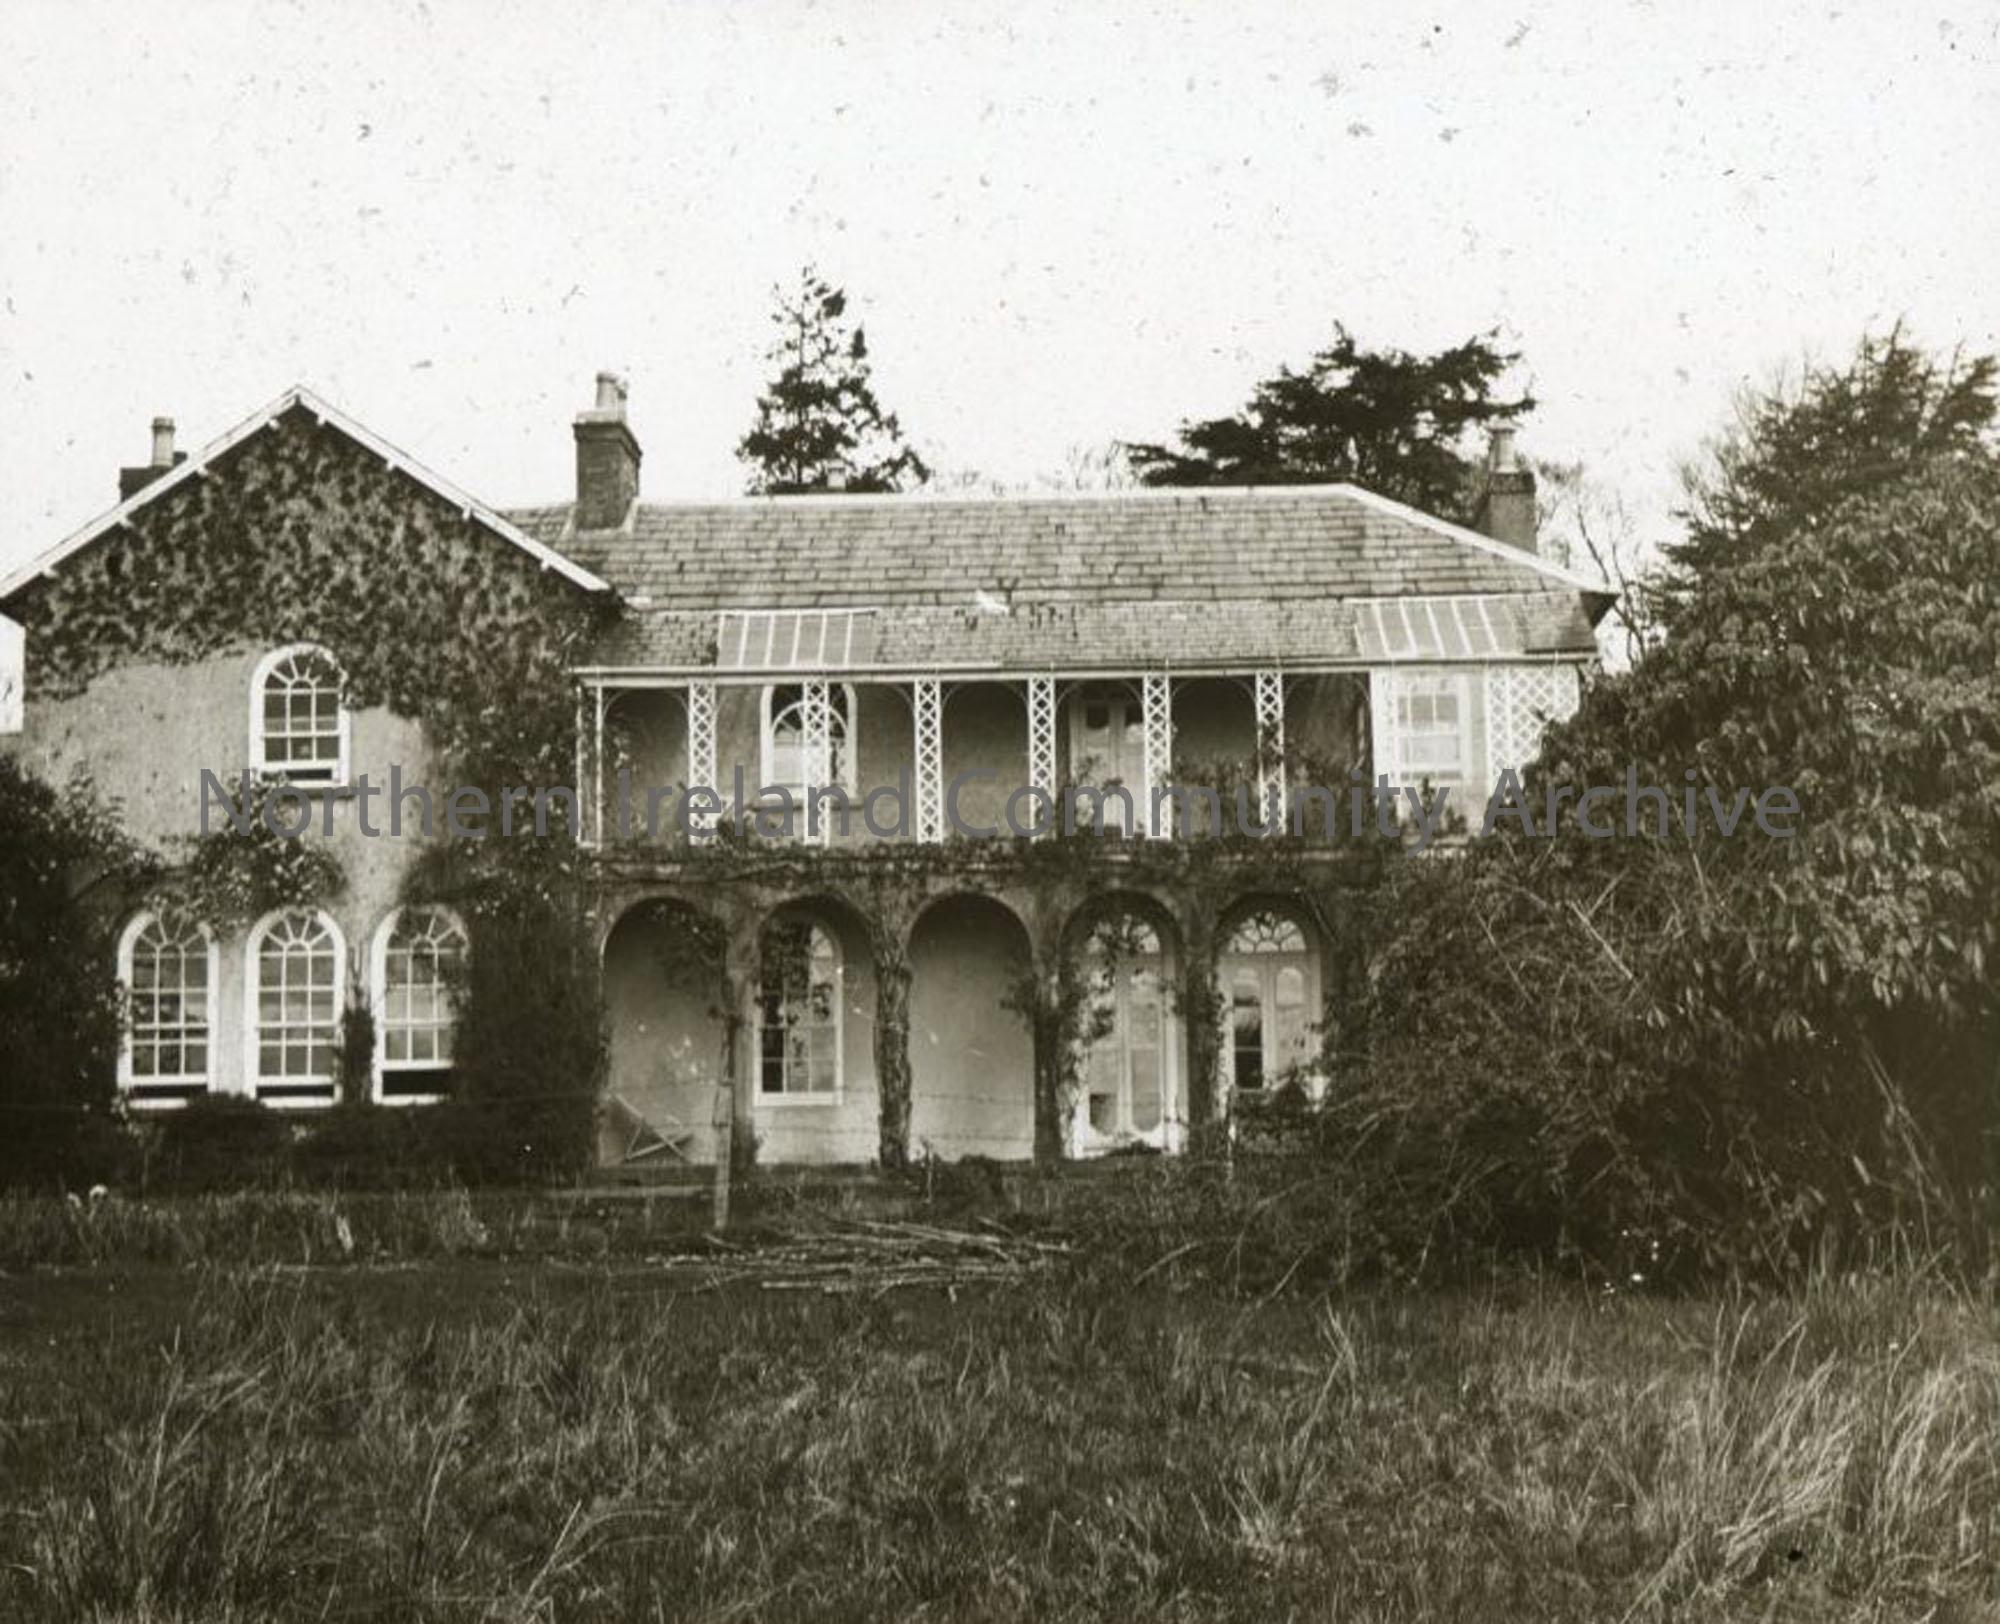 Lissan Rectory as titled by Sam Henry